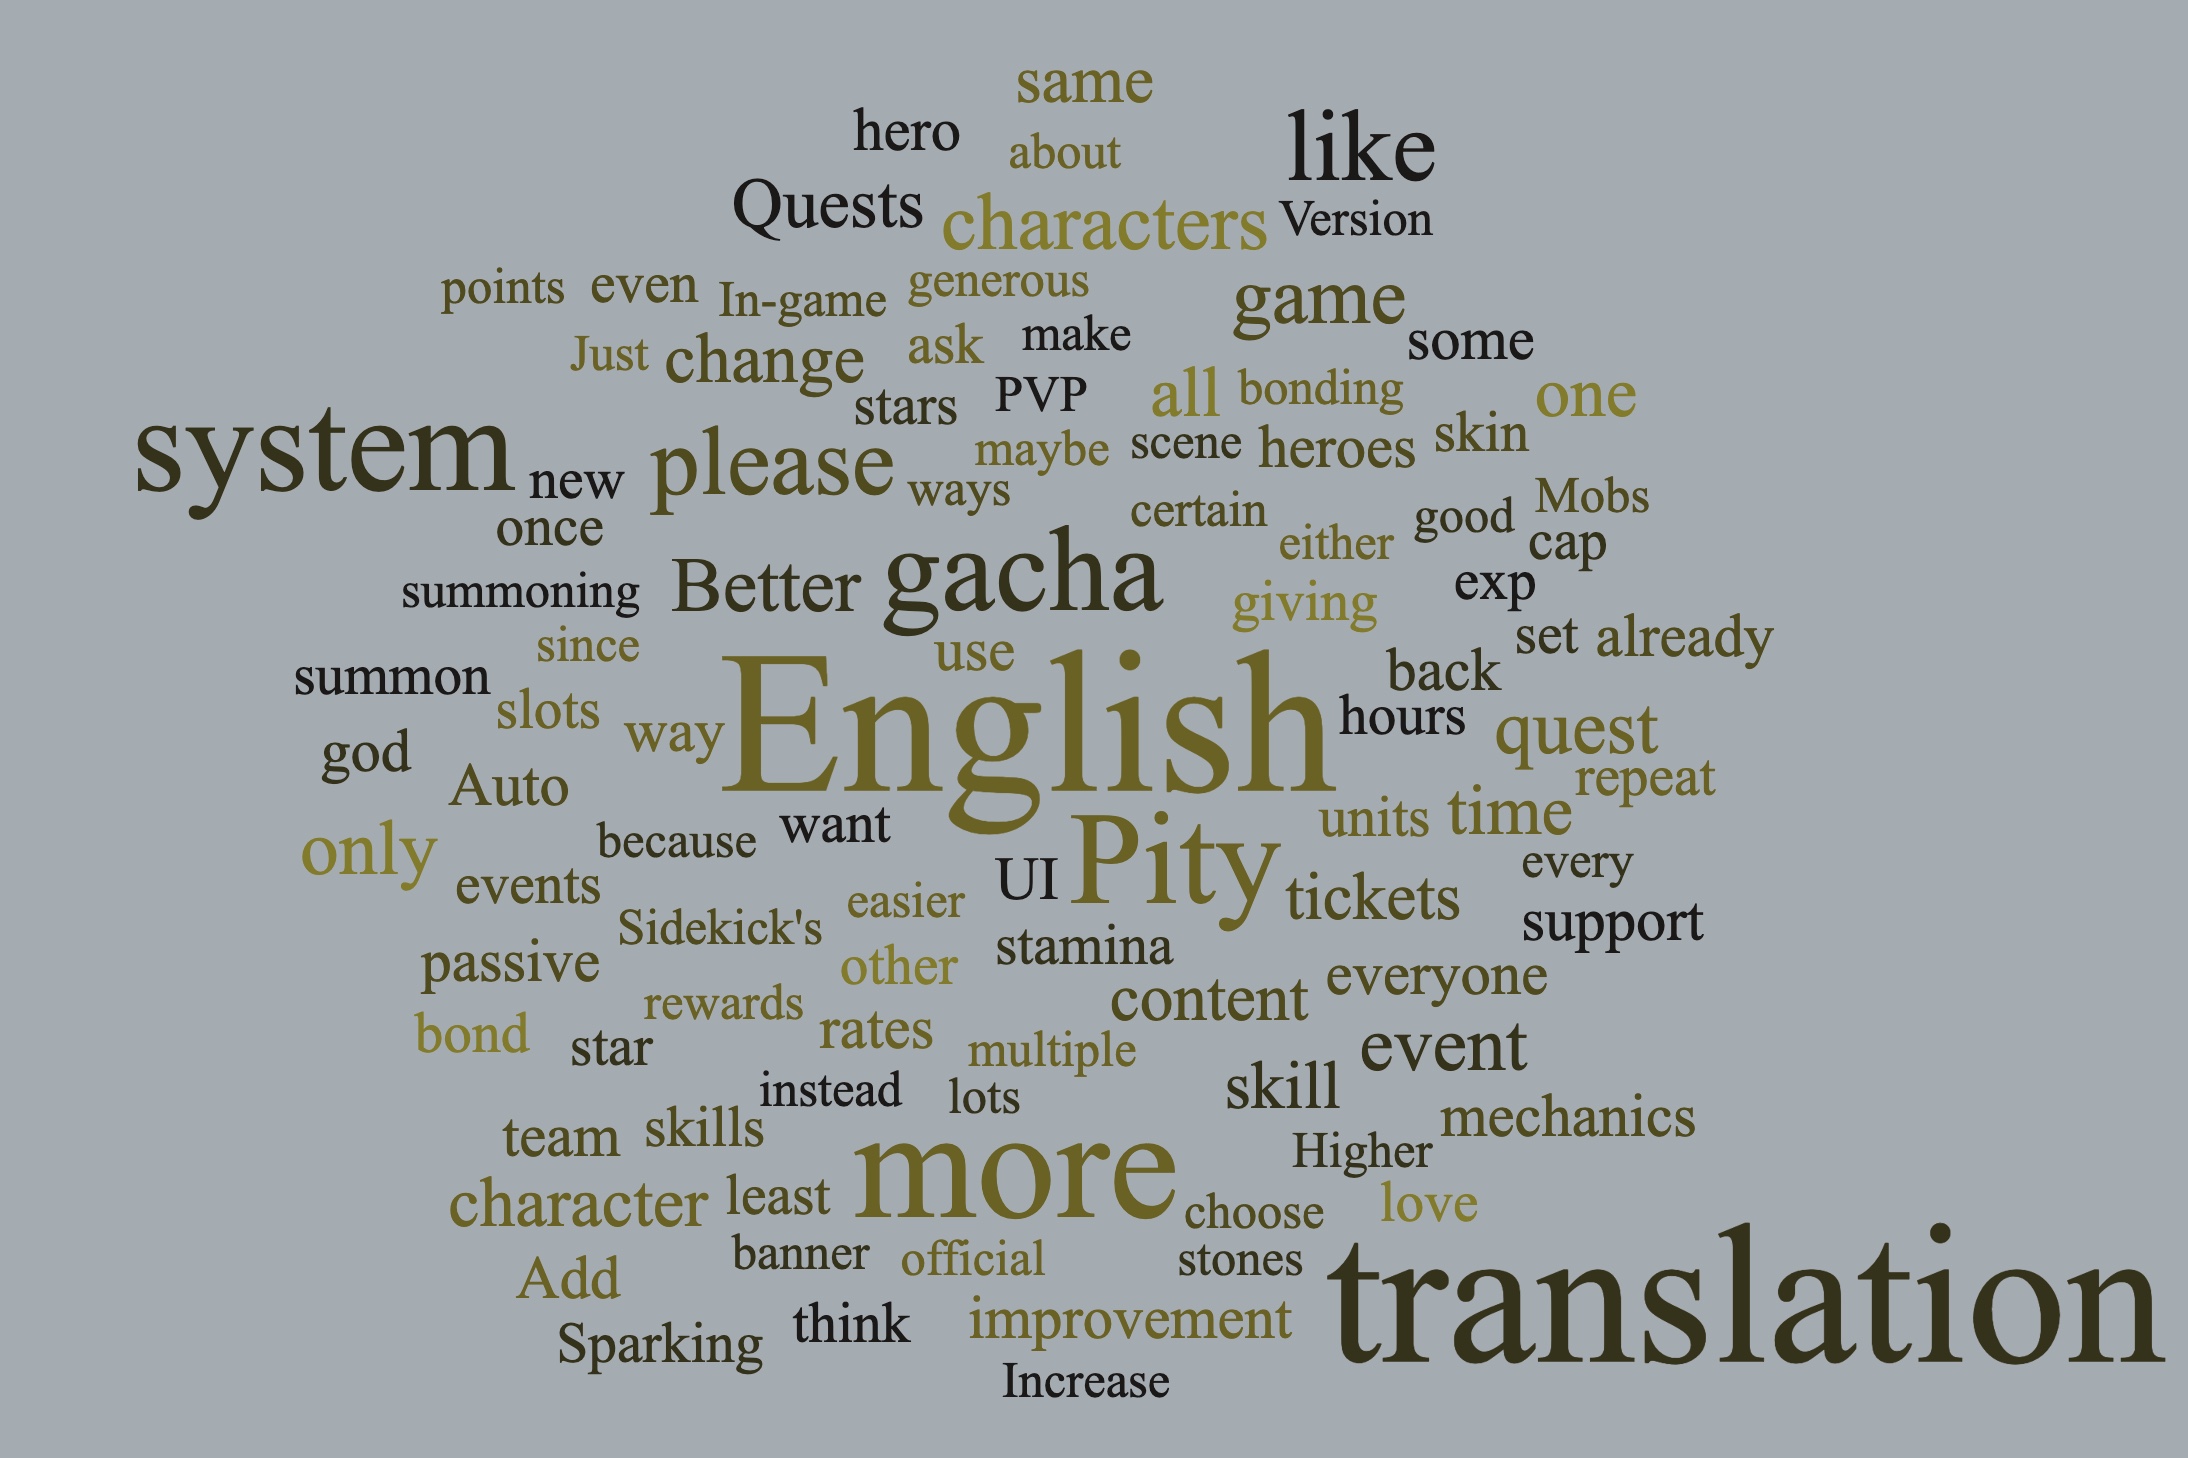 Game improvement comments as word cloud